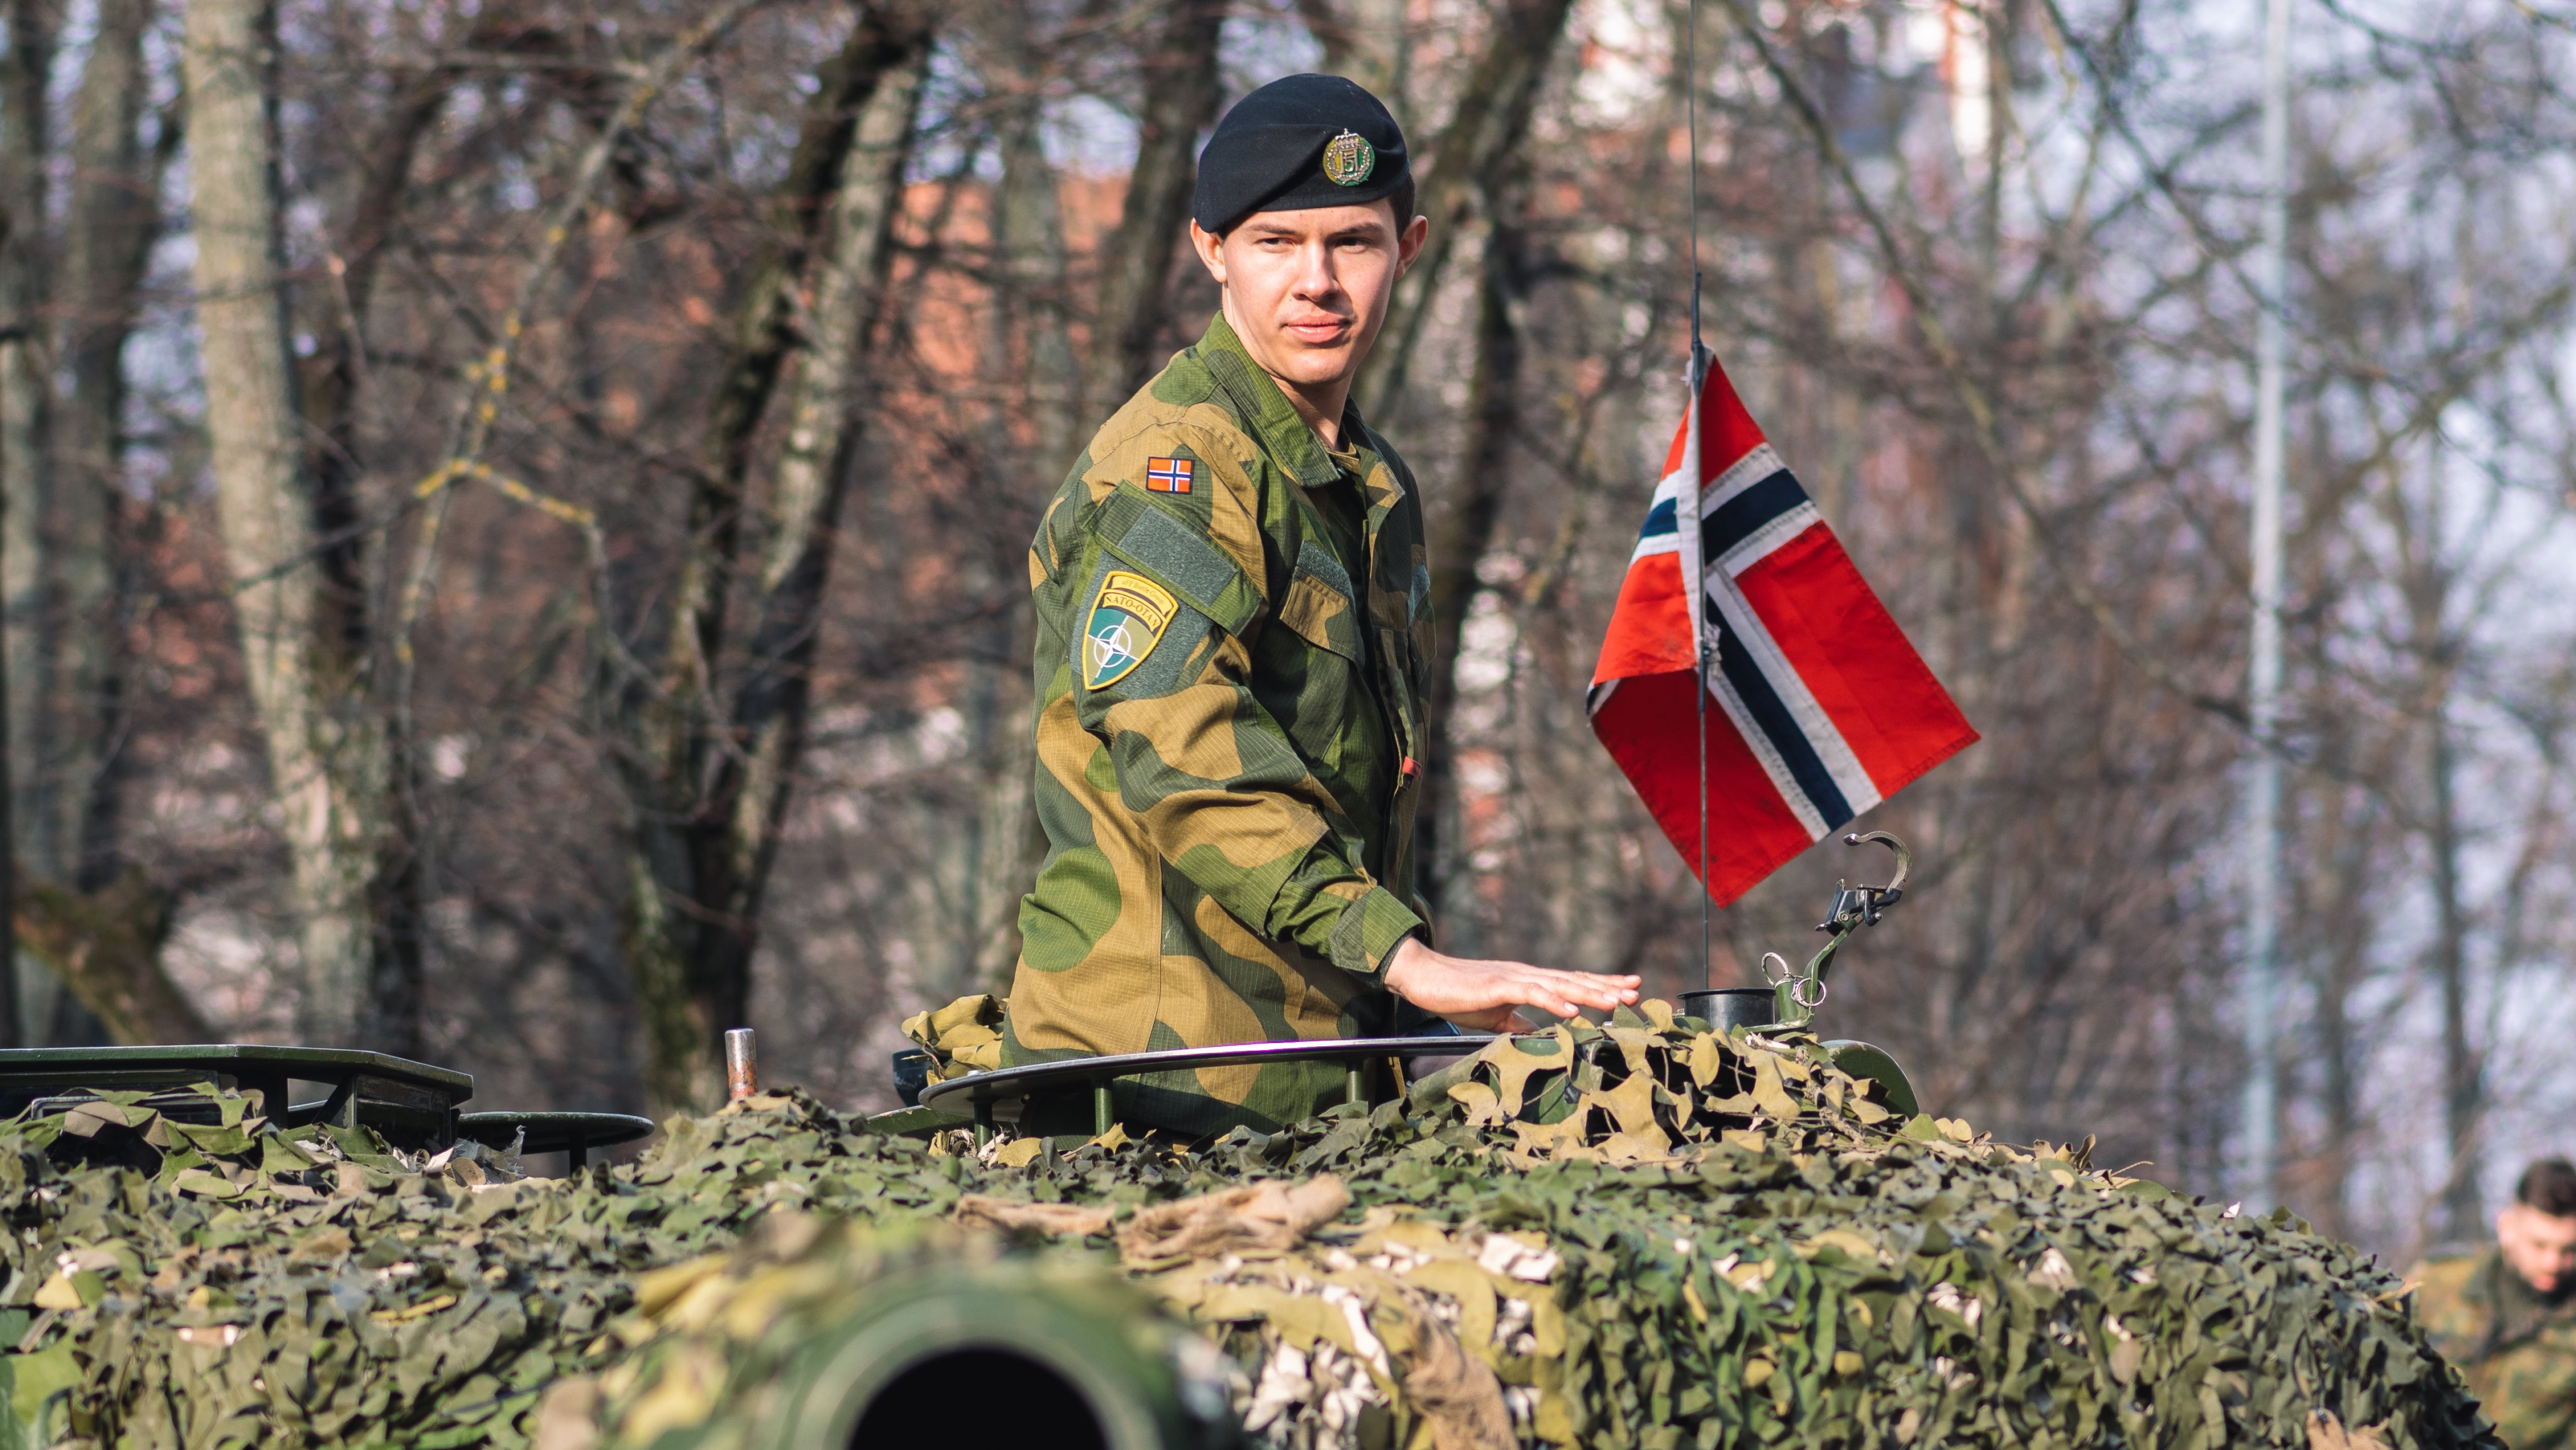 Norwegian Army armored tank with cannon and camouflage coating